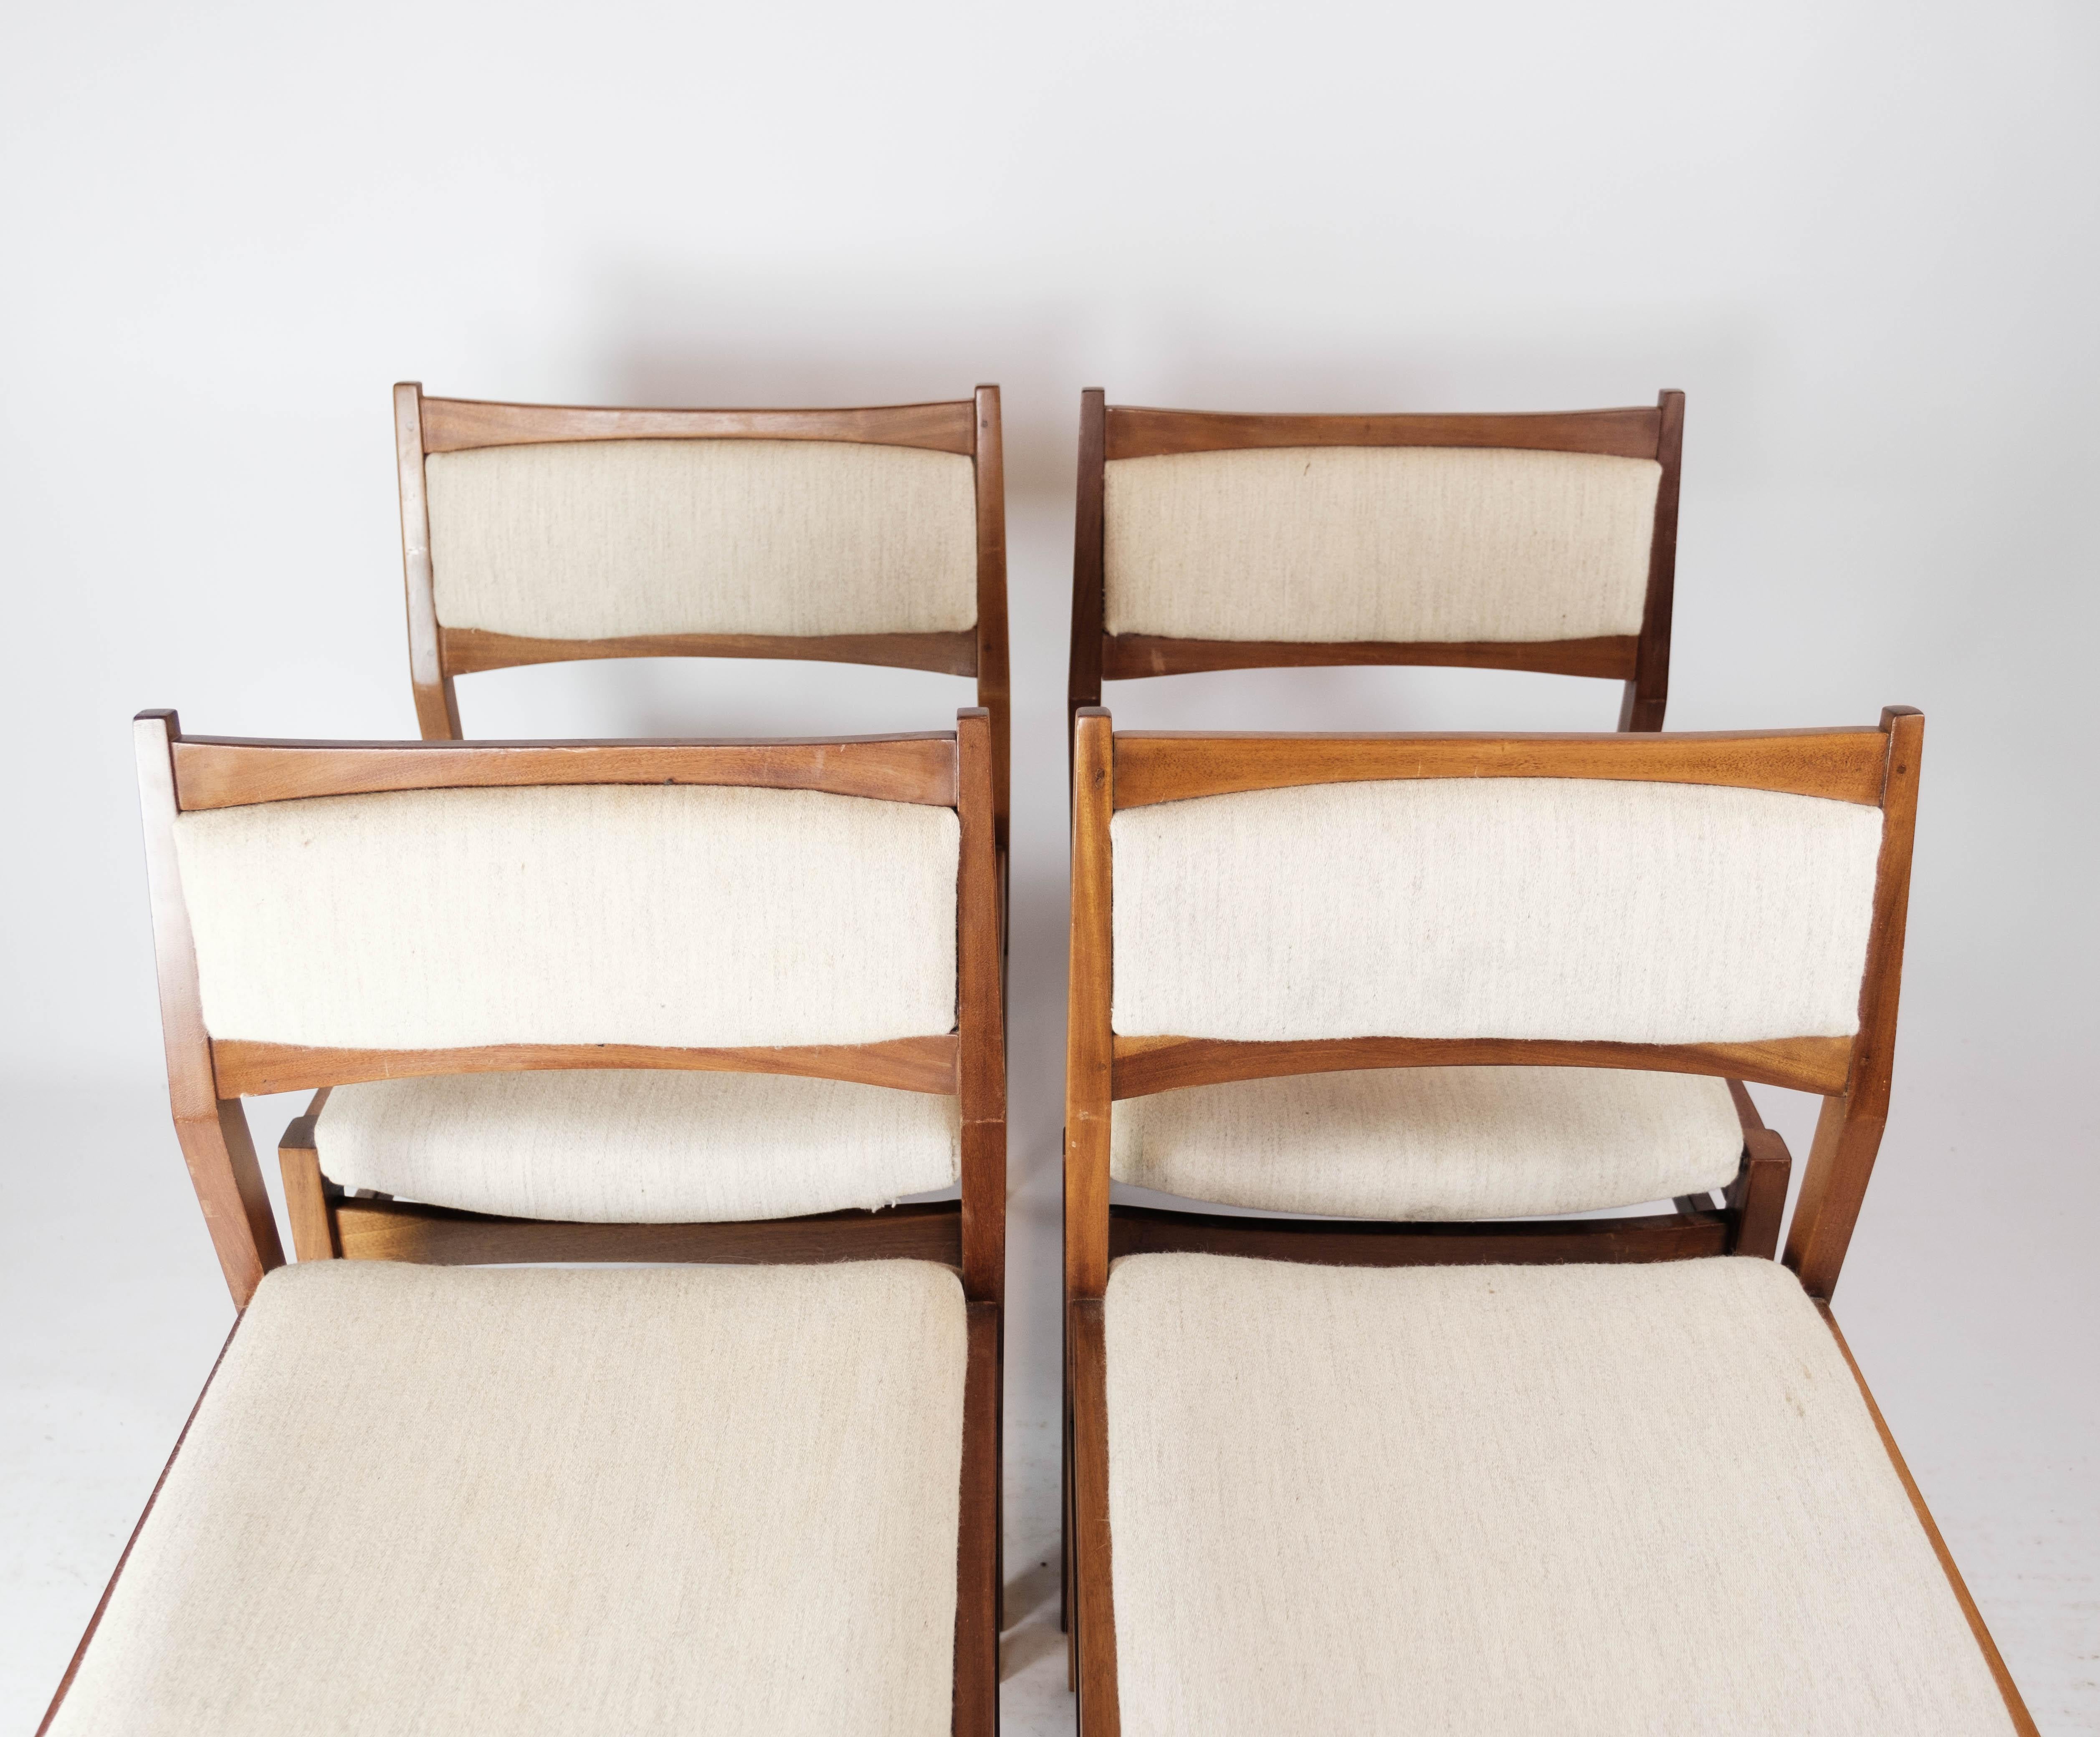 Mid-20th Century Set of Four Dining Room Chairs in Teak of Danish Design, 1960s